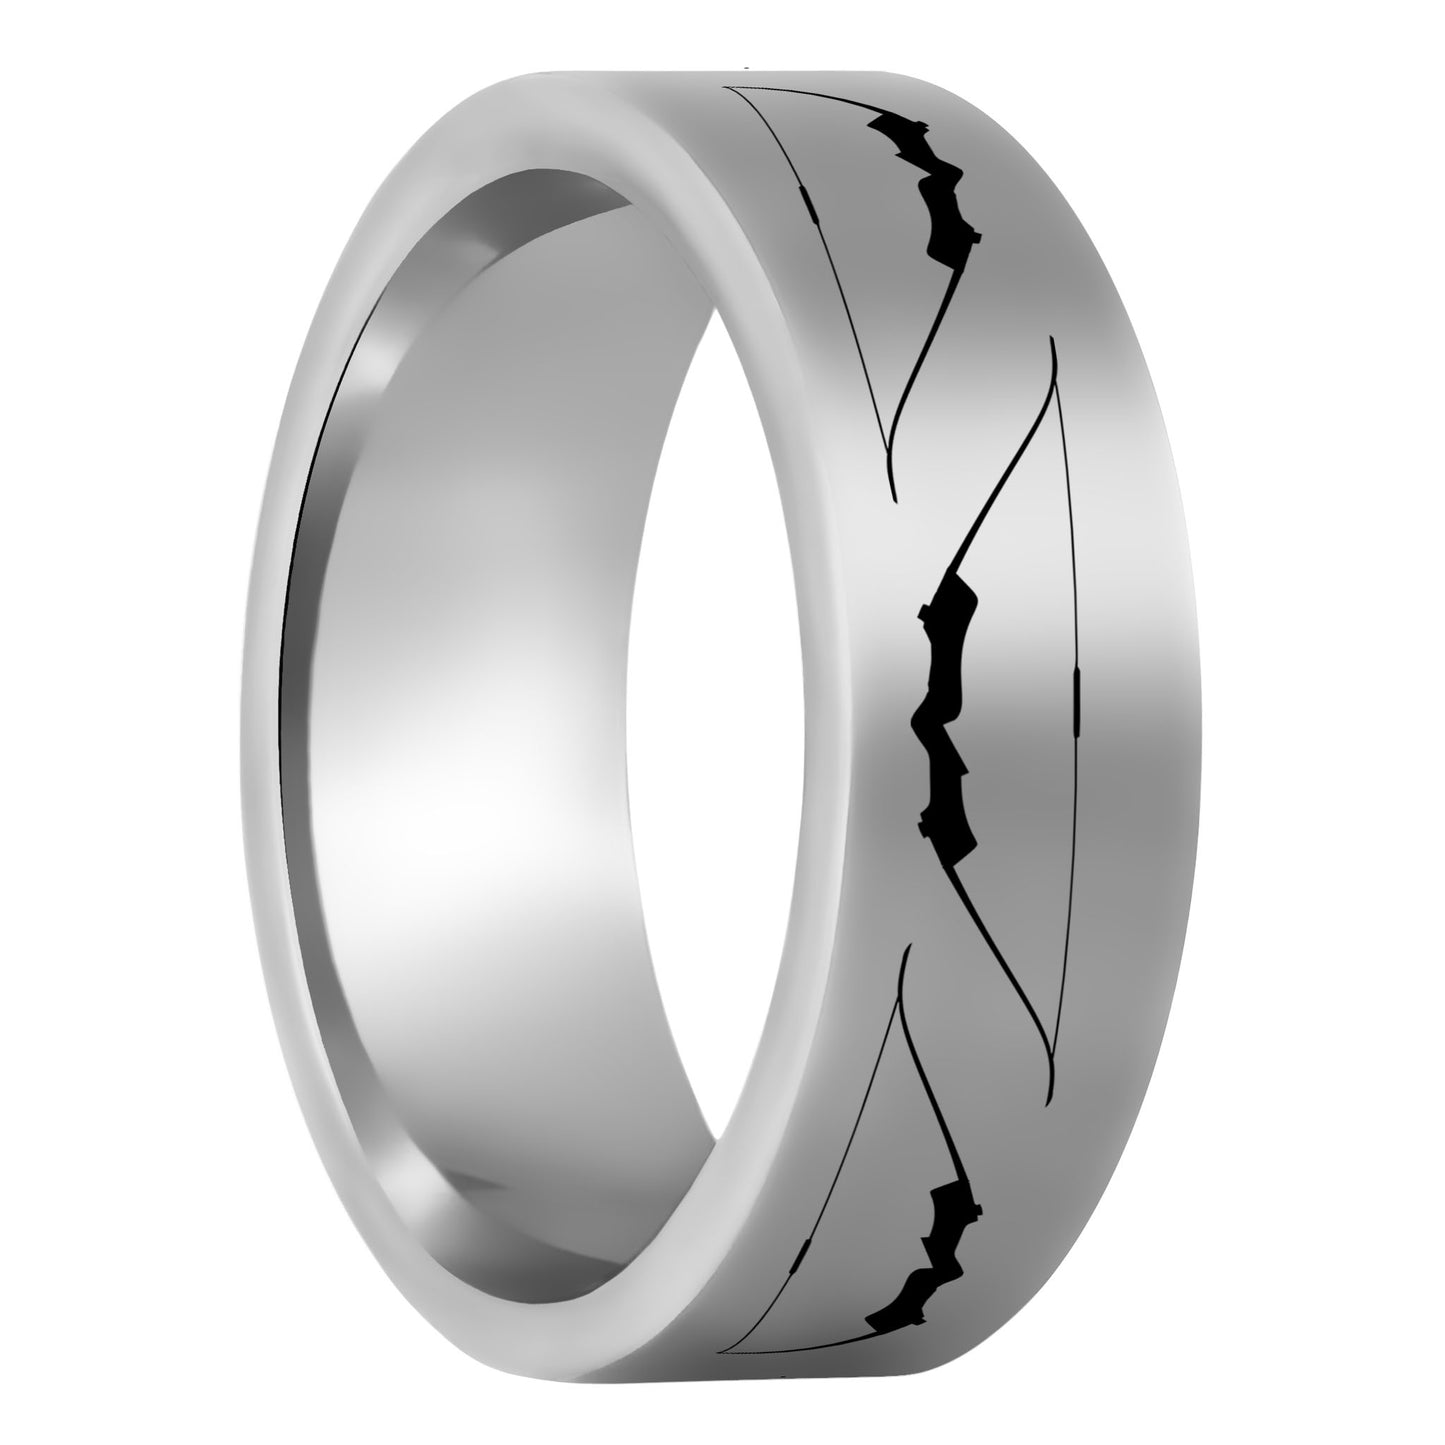 One Archery Bow Tungsten Men's Wedding Band displayed on a plain white background